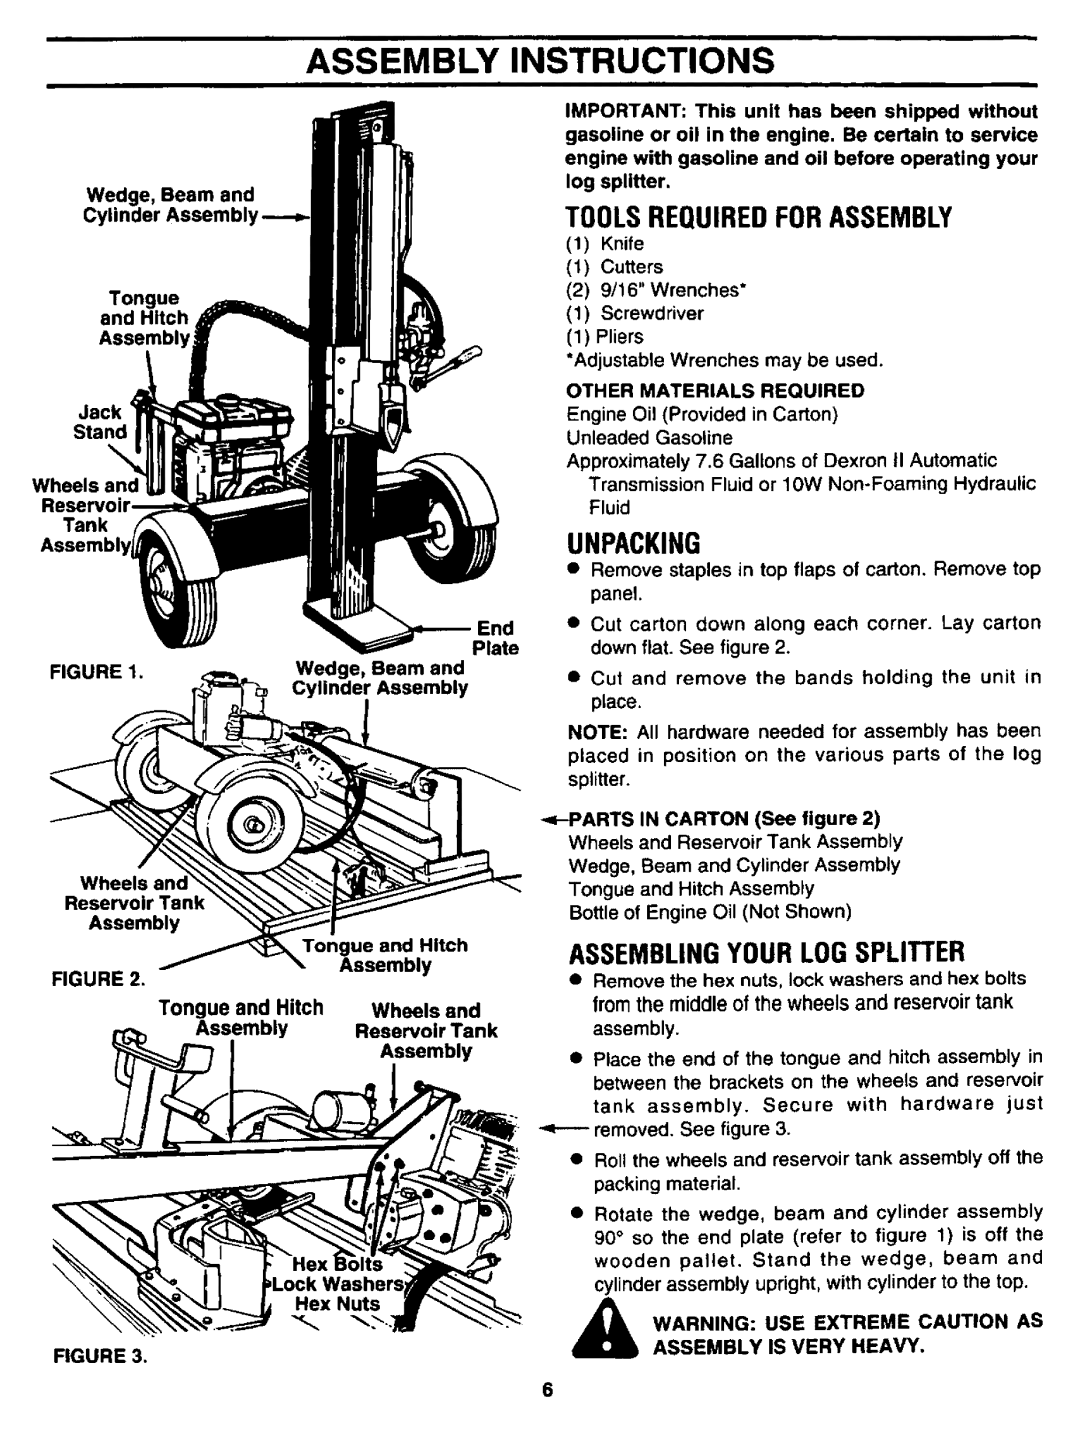 Sears 247.34625 owner manual Assembly, Instructions, Toolsrequiredforassembly, Unpacking, Assemblingyour Log Splitter 